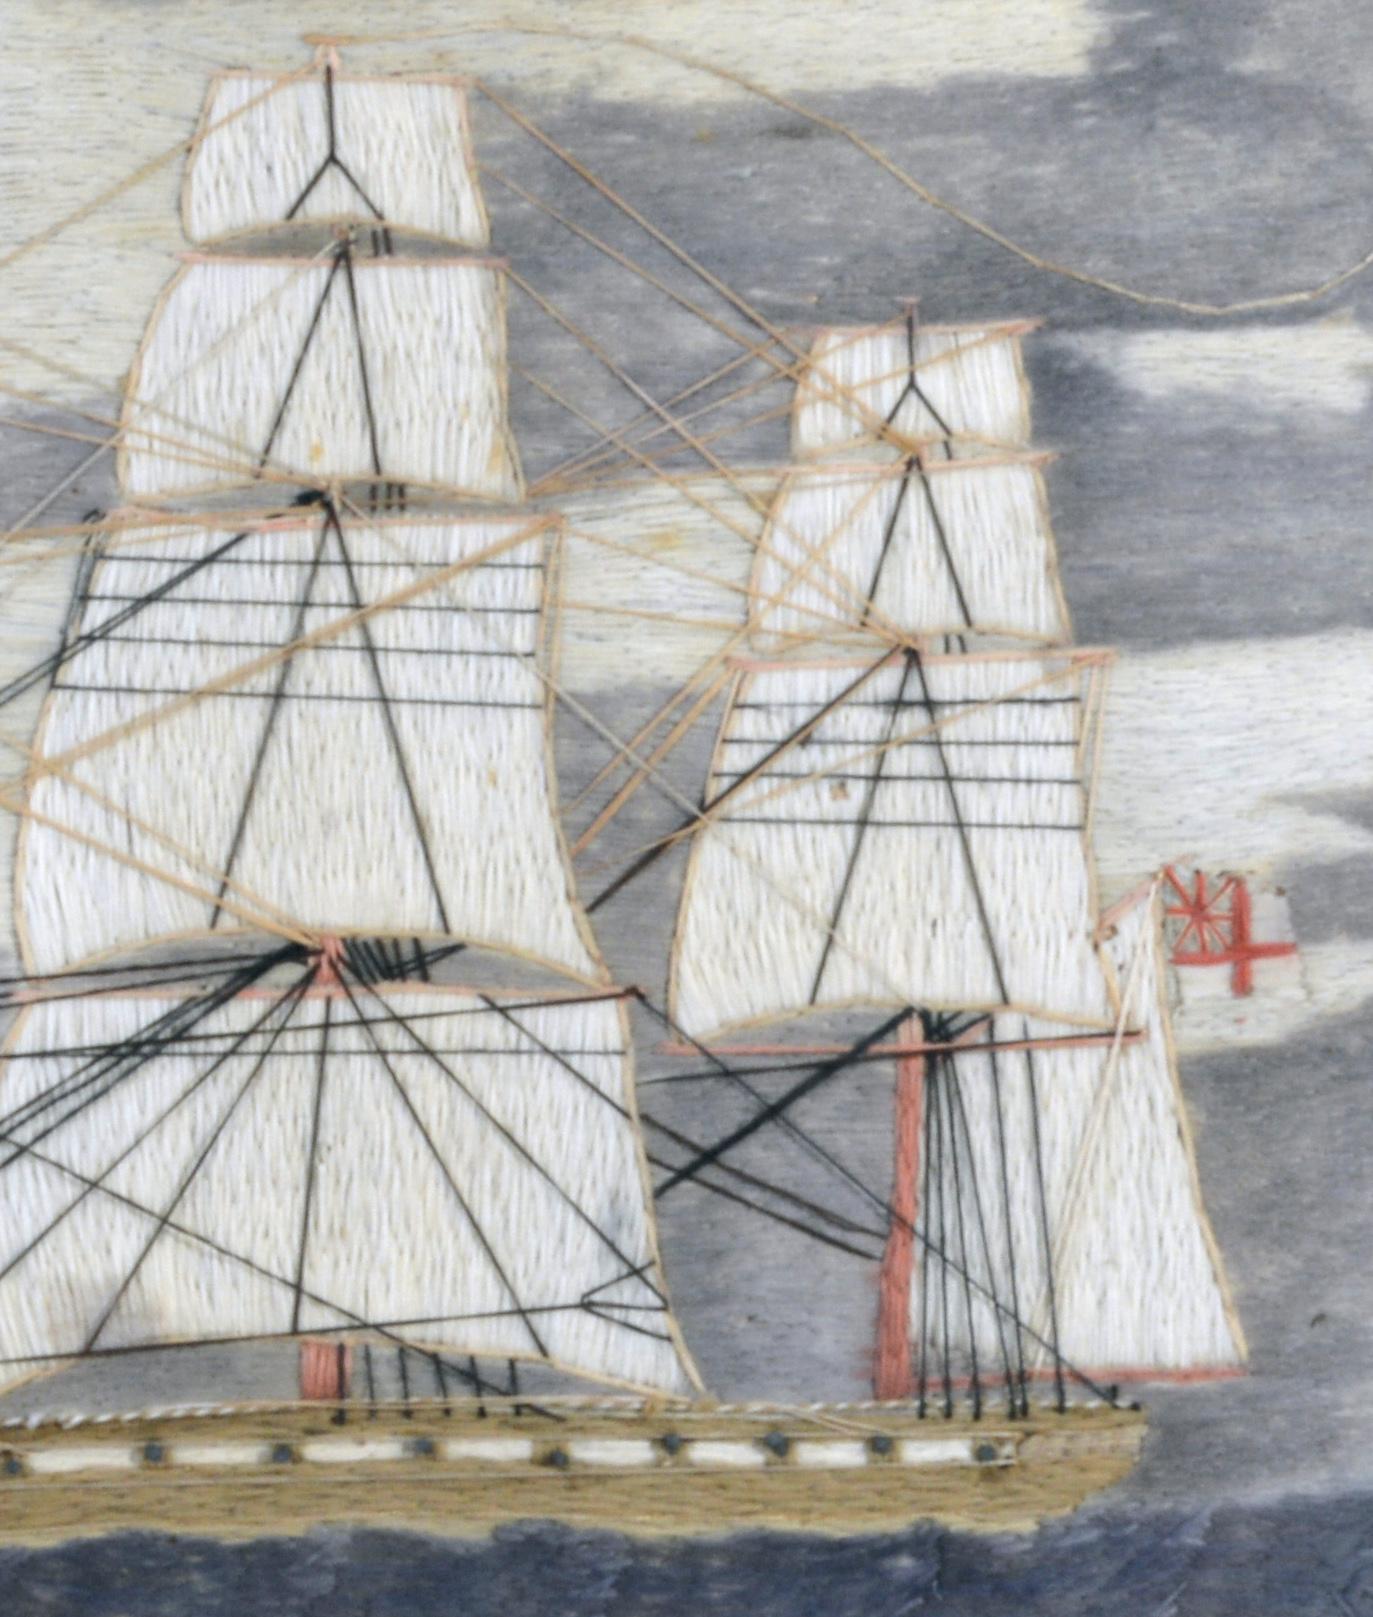 English Sailor's Woolwork of a Royal Navy Frigate,
circa 1870.

The sailor's woolie depicts a portside view of a Royal Navy Frigate flying the White Ensign from the Mizzenmast. The ship is coming into port with the tide and a lighthouse and